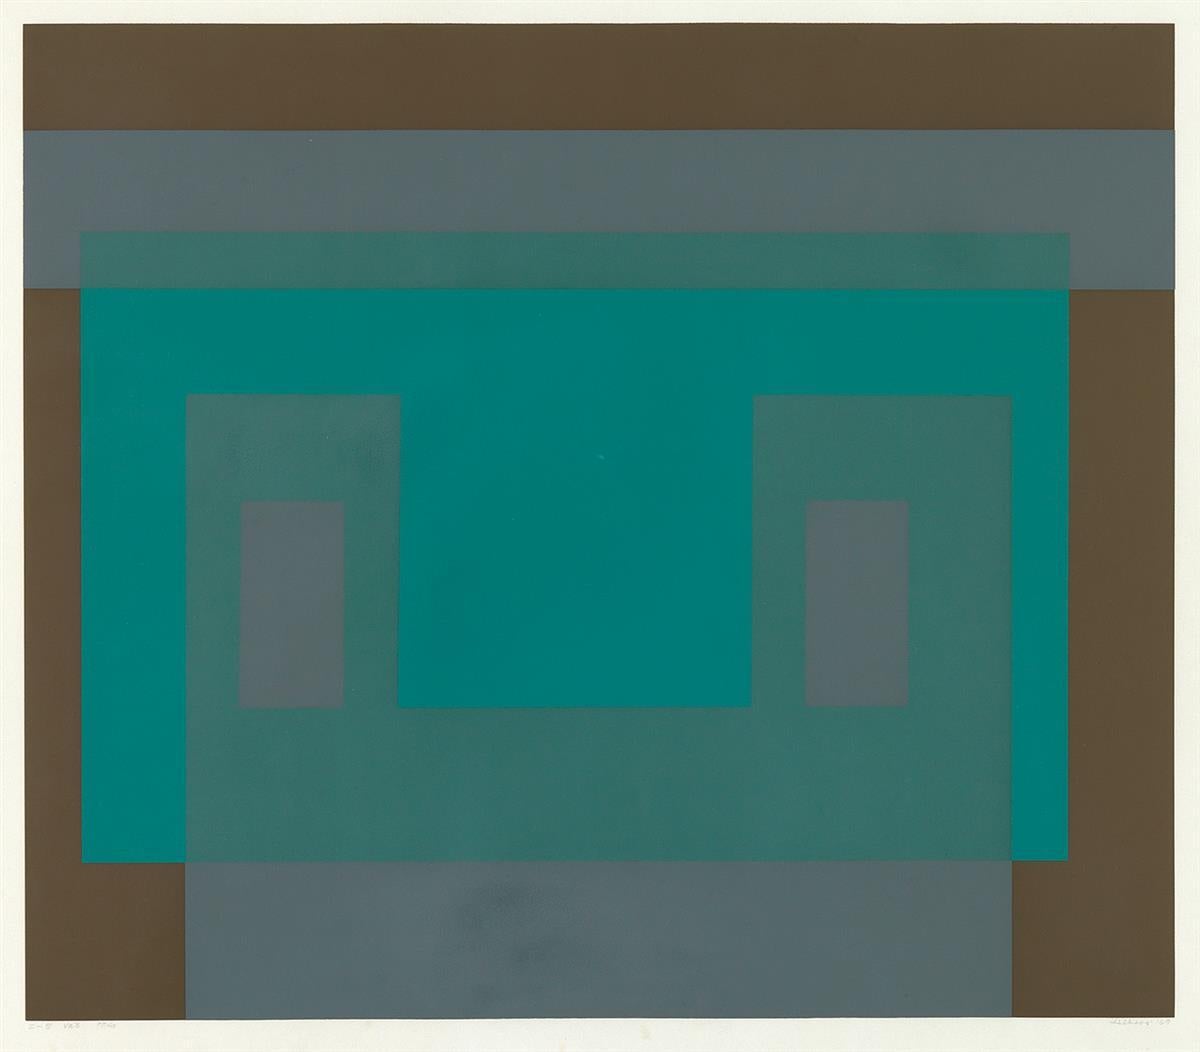 JOSEF ALBERS
 I-S Va 3 (From Six Variants)
 
Color screenprint on Arches paper, 1969
Image Size: 24” x 27 3⁄4” inches, wide margins
Initialed by artist, titled, dated and numbered 77/150 in pencil, lower margin
Printed by Sirocco Screenprints, New